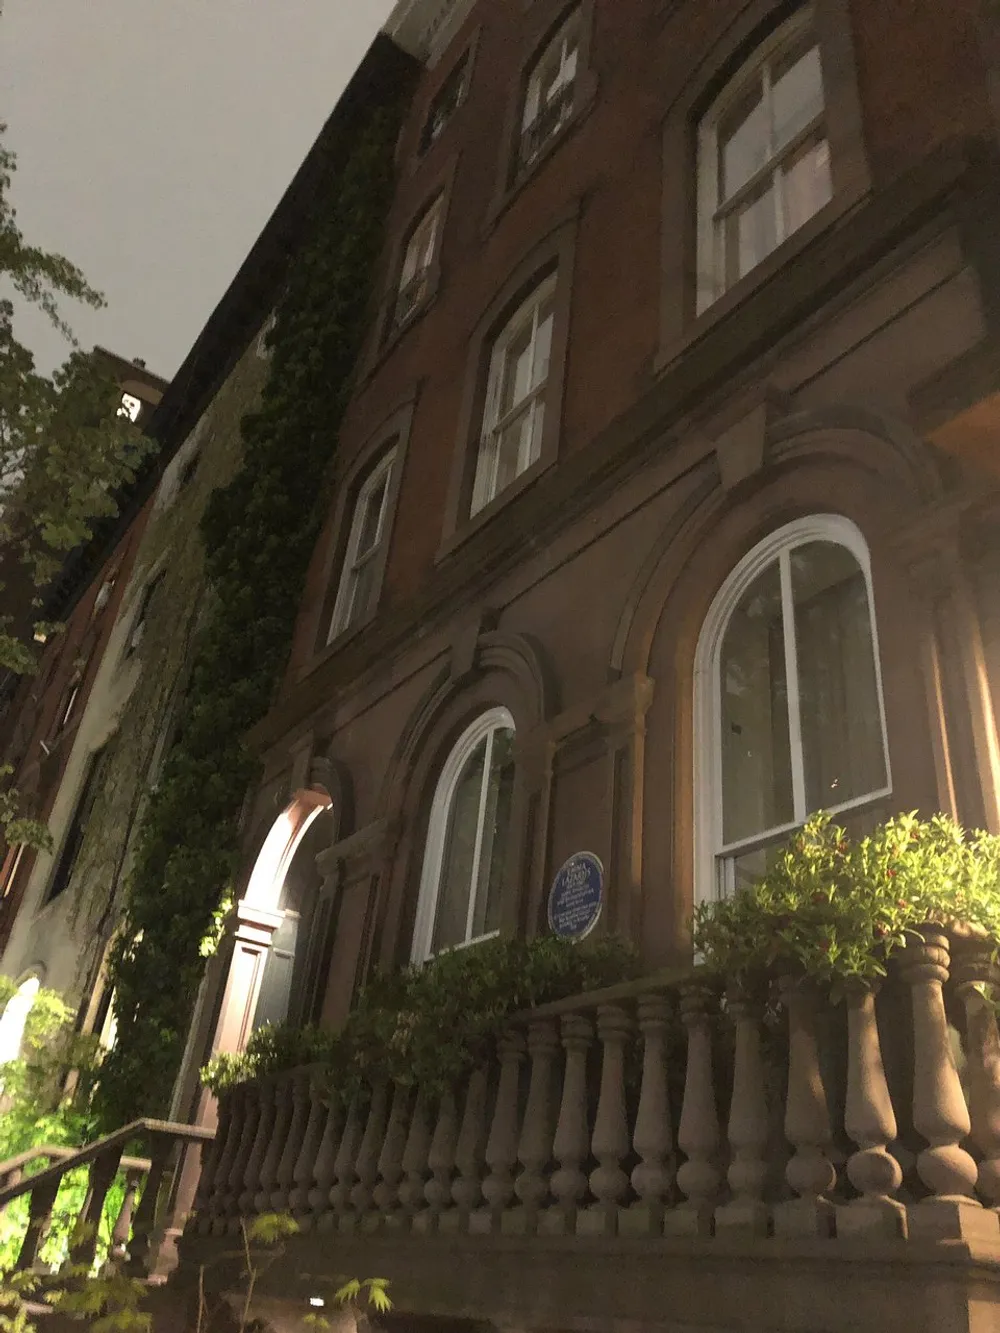 This image shows a nighttime view of a brownstone building with large arched windows a blue commemorative plaque and plants decorating the entrance staircase